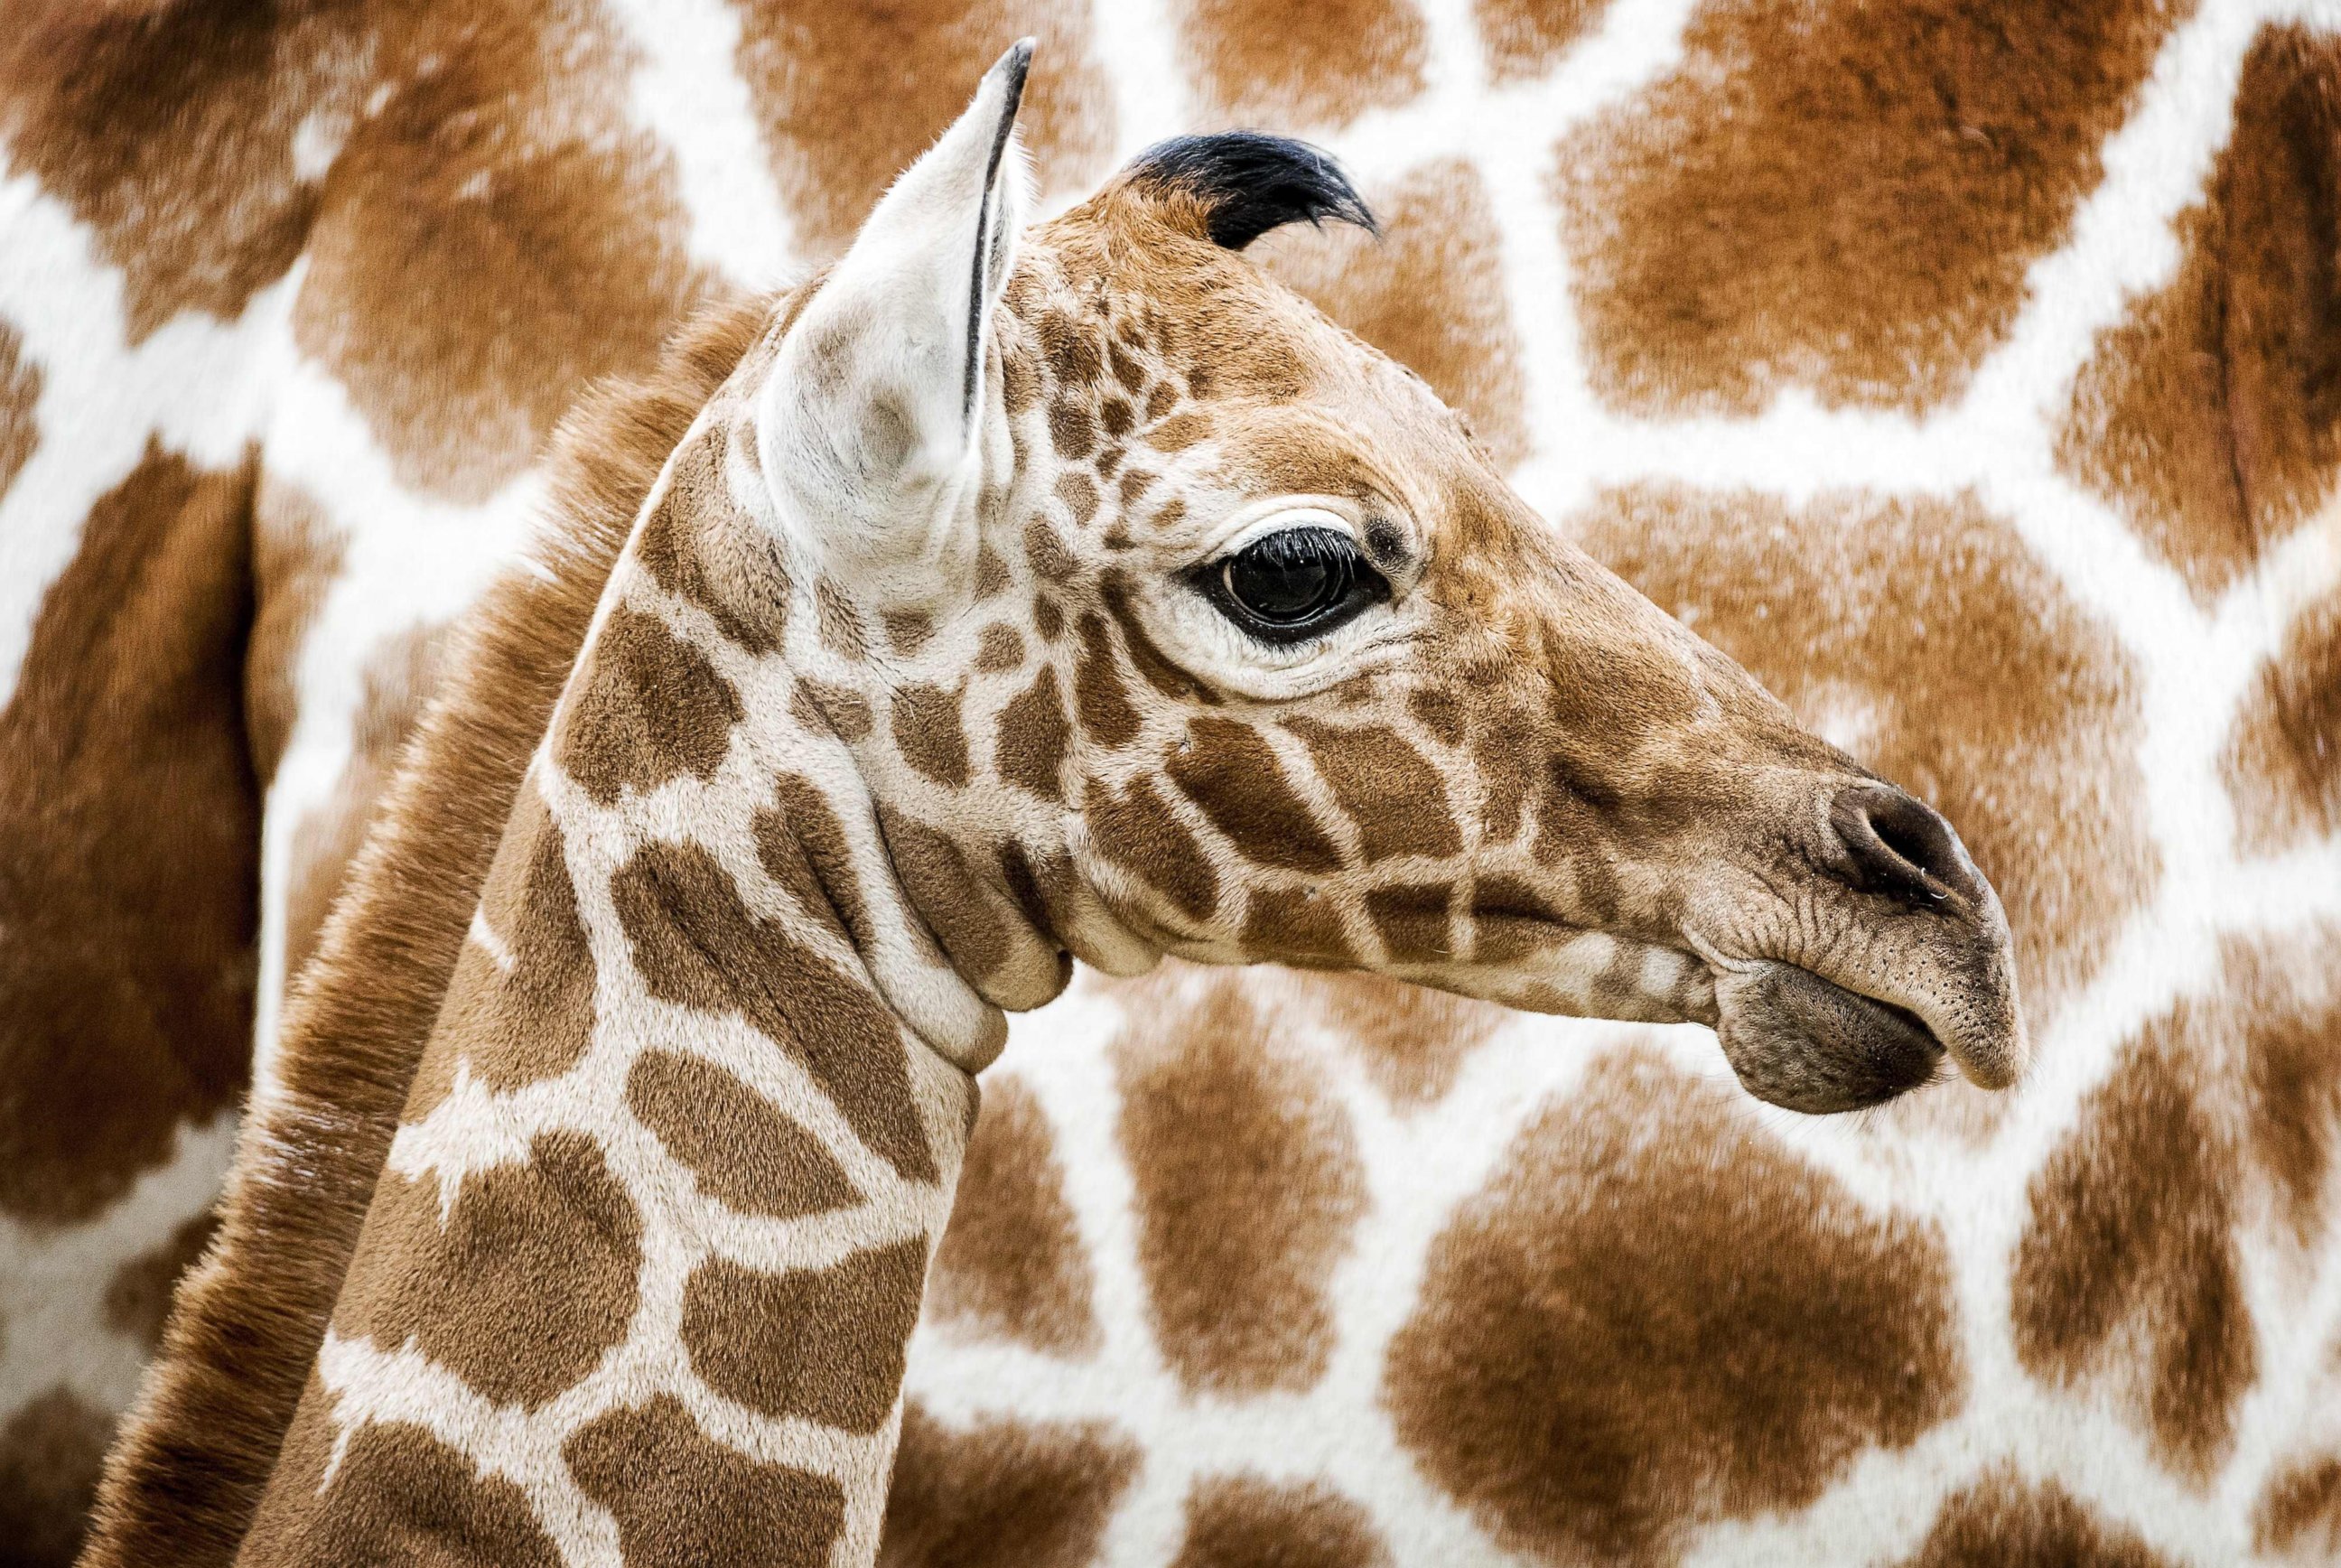 PHOTO: A newborn reticulated giraffe is seen for the first time in the savannah habitat at Artis Zoo in Amsterdam, Nov. 21, 2016.